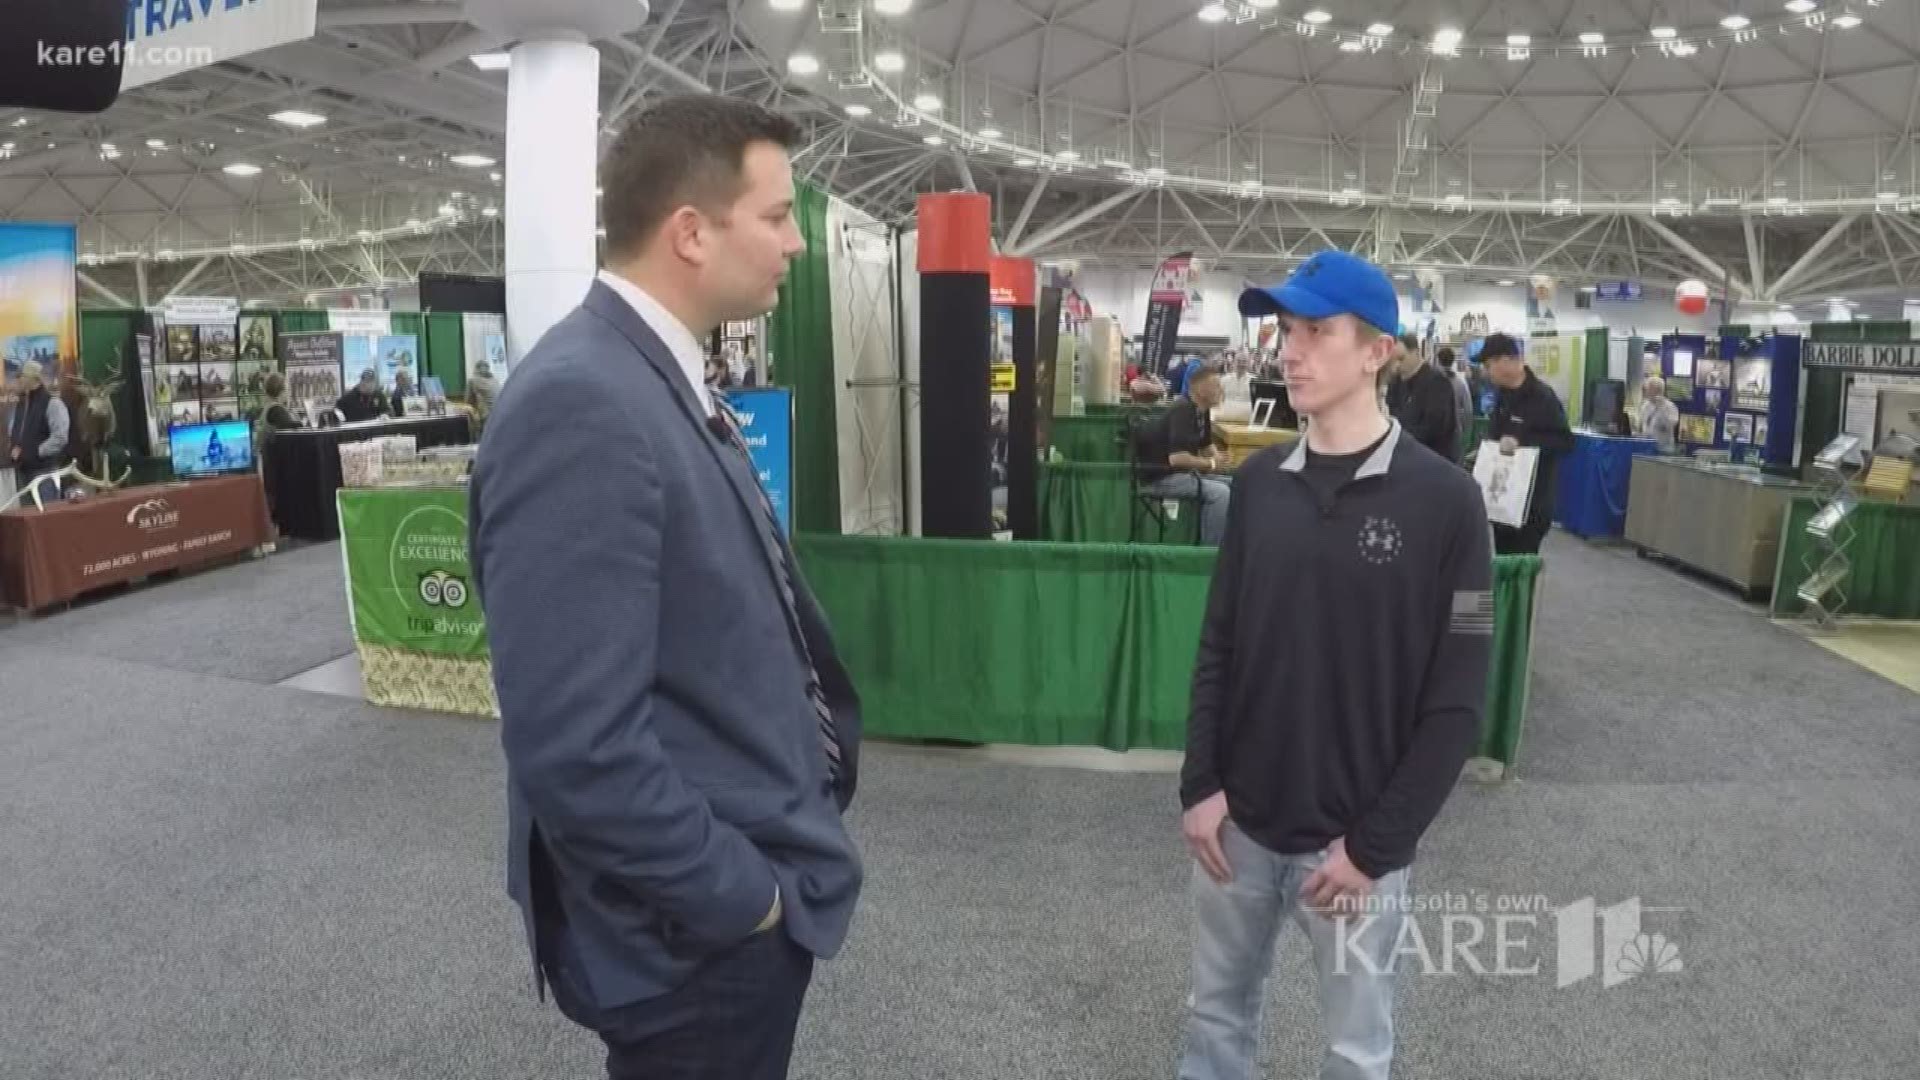 KARE 11's Chris Hrapsky spoke to students in support of gun rights. http://kare11.tv/2DNqrB2